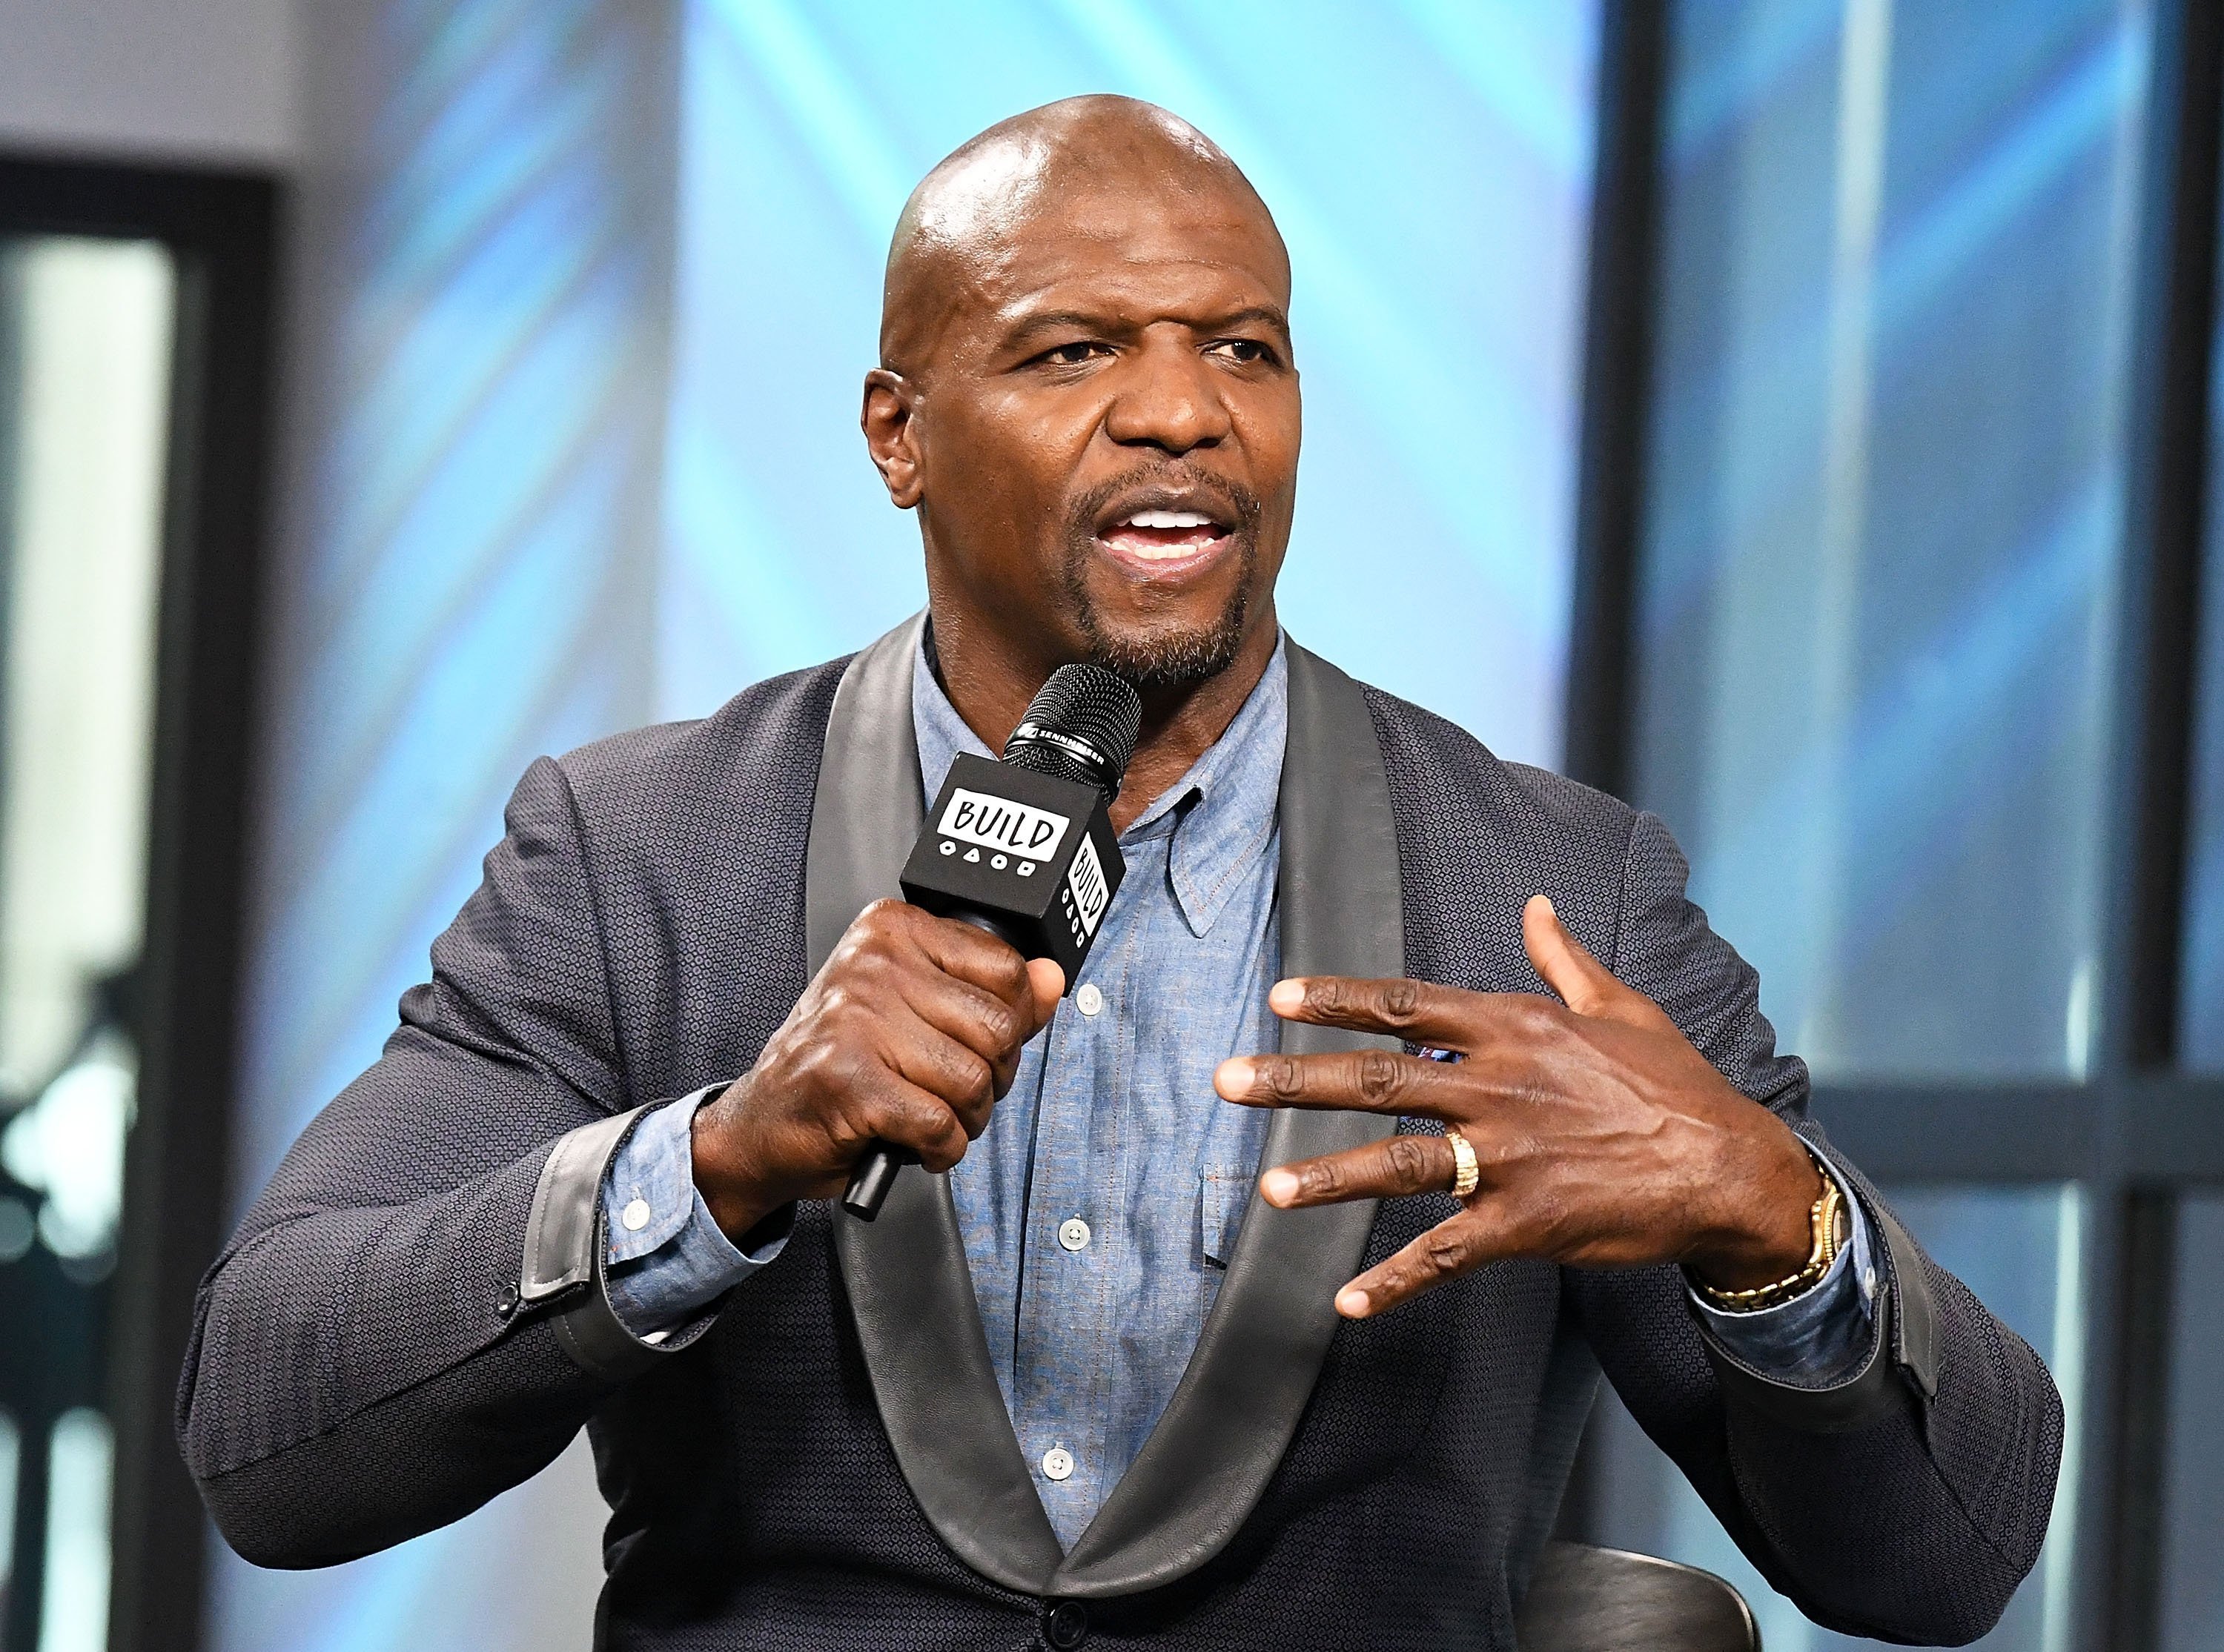 Terry Crews at the Build Series event | Photo: Getty Images